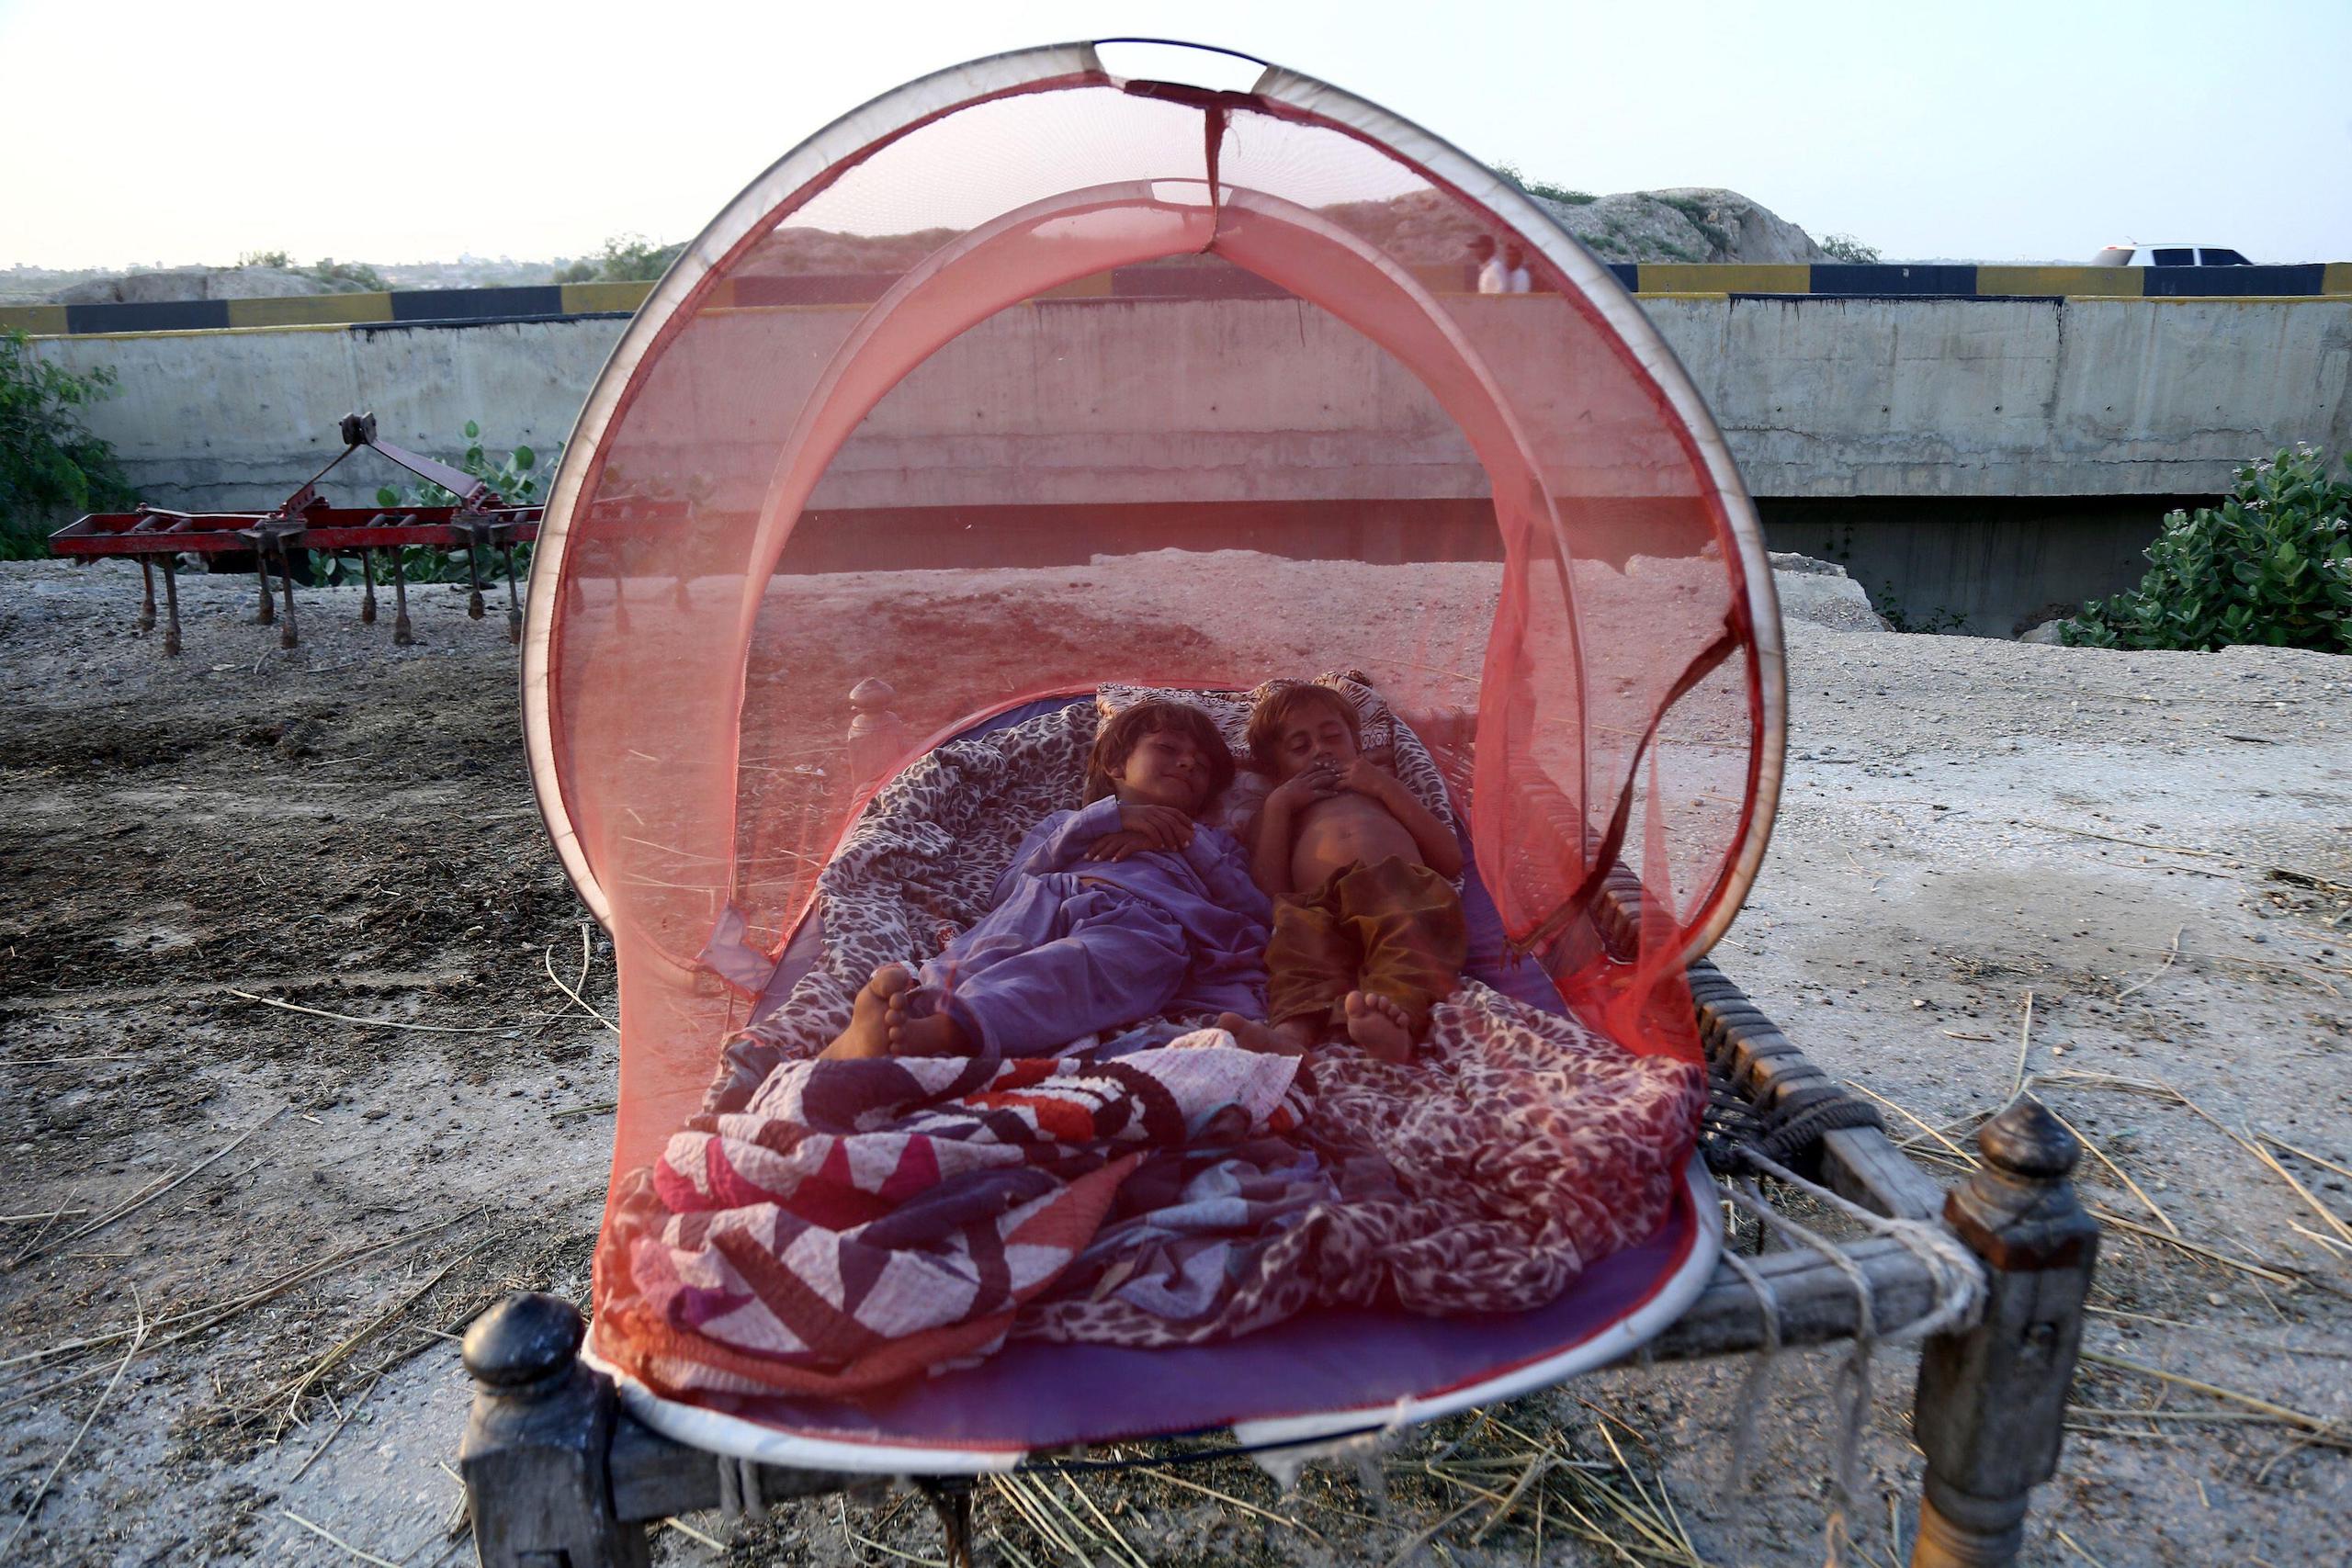 Flood-affected children sleep in a mosquito net in Jamshoro district in Pakistan's Sindh province on 8 September 2022. At least 36 people were killed in heavy monsoon rain-triggered flash floods in 24 hours in Pakistan, the National Disaster Management Authority (NDMA) said. Photo: Xinhua / Alamy Live News